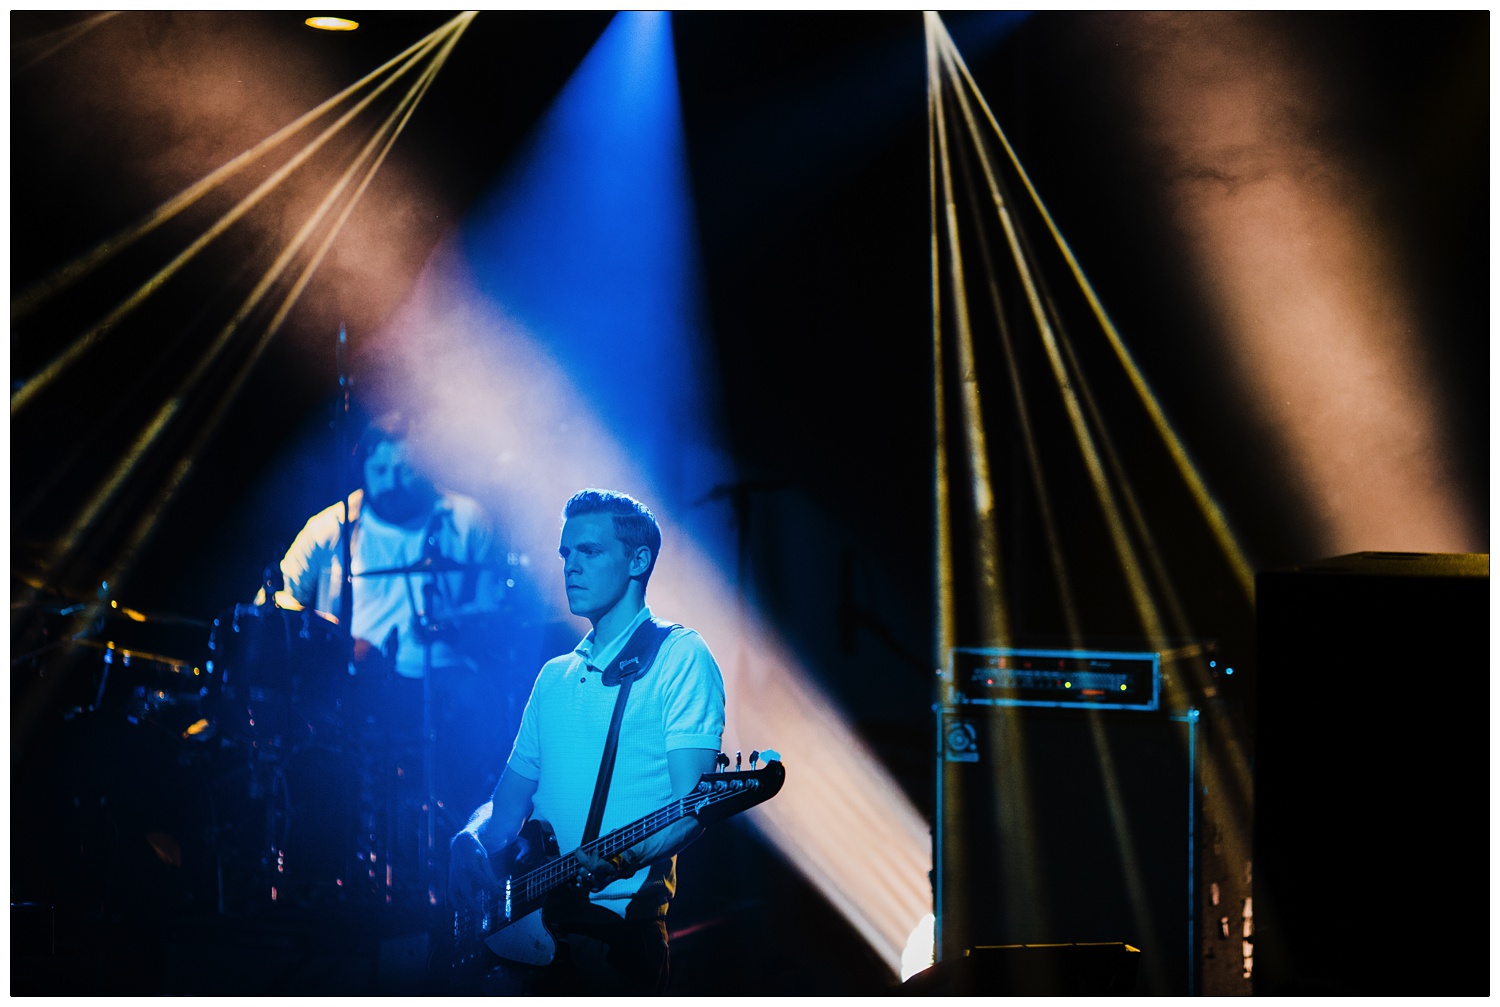 Adam Harrison playing bass and Piers Hewitt on drums in blue lights at The Boxer Rebellion gig in 2014